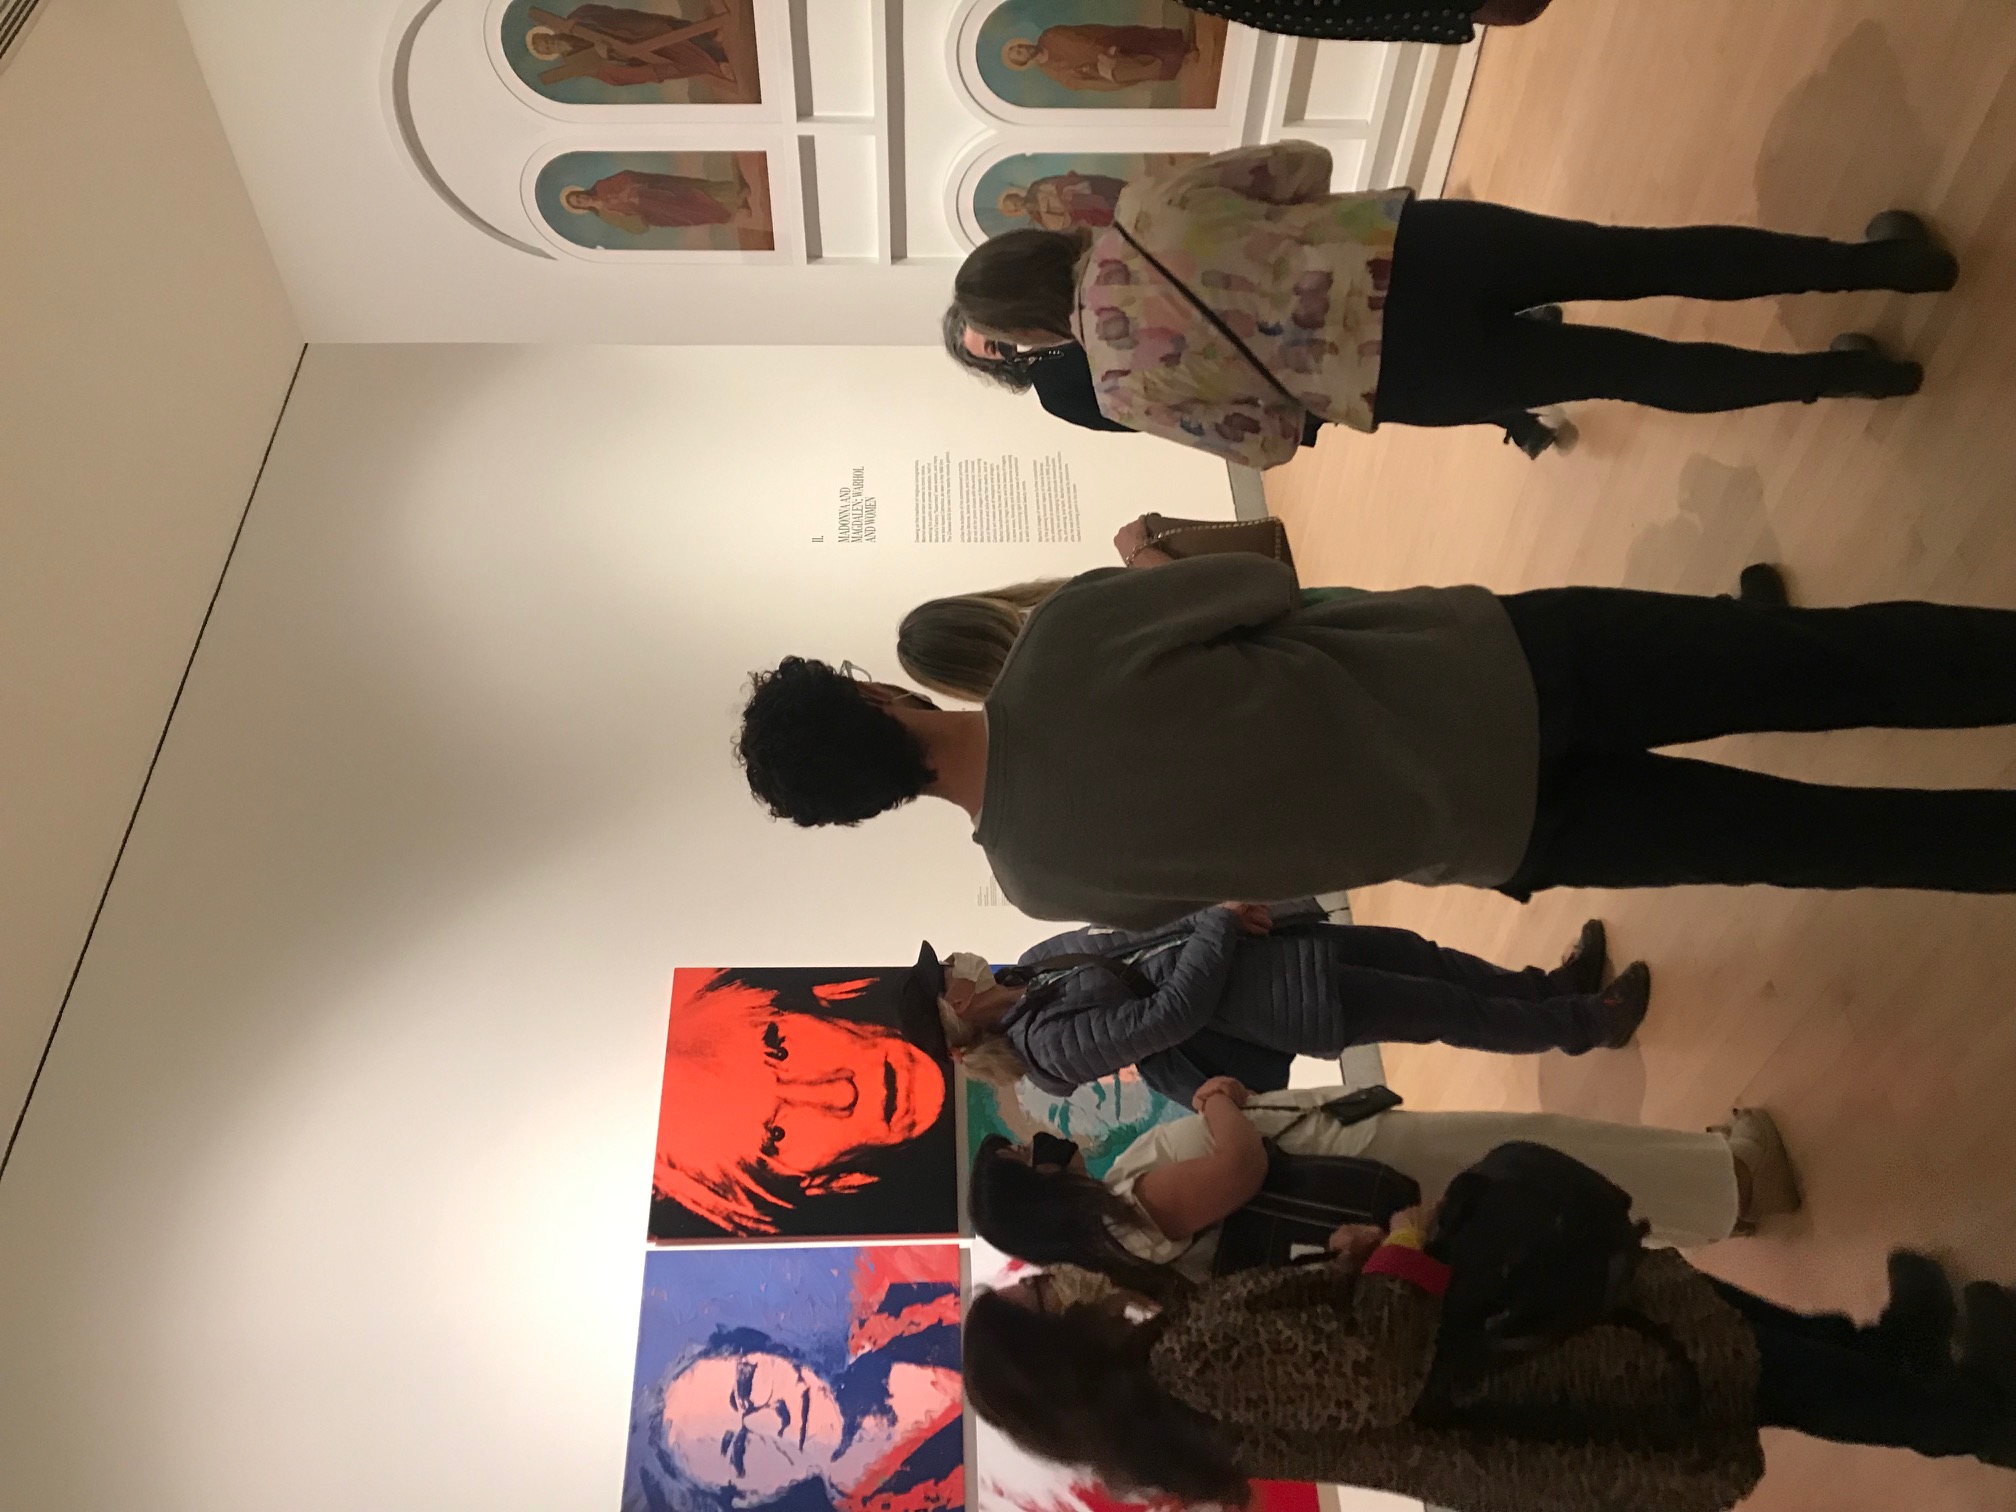 Eight people standing in a gallery besides pop art photographs and depictions of heavenly figures